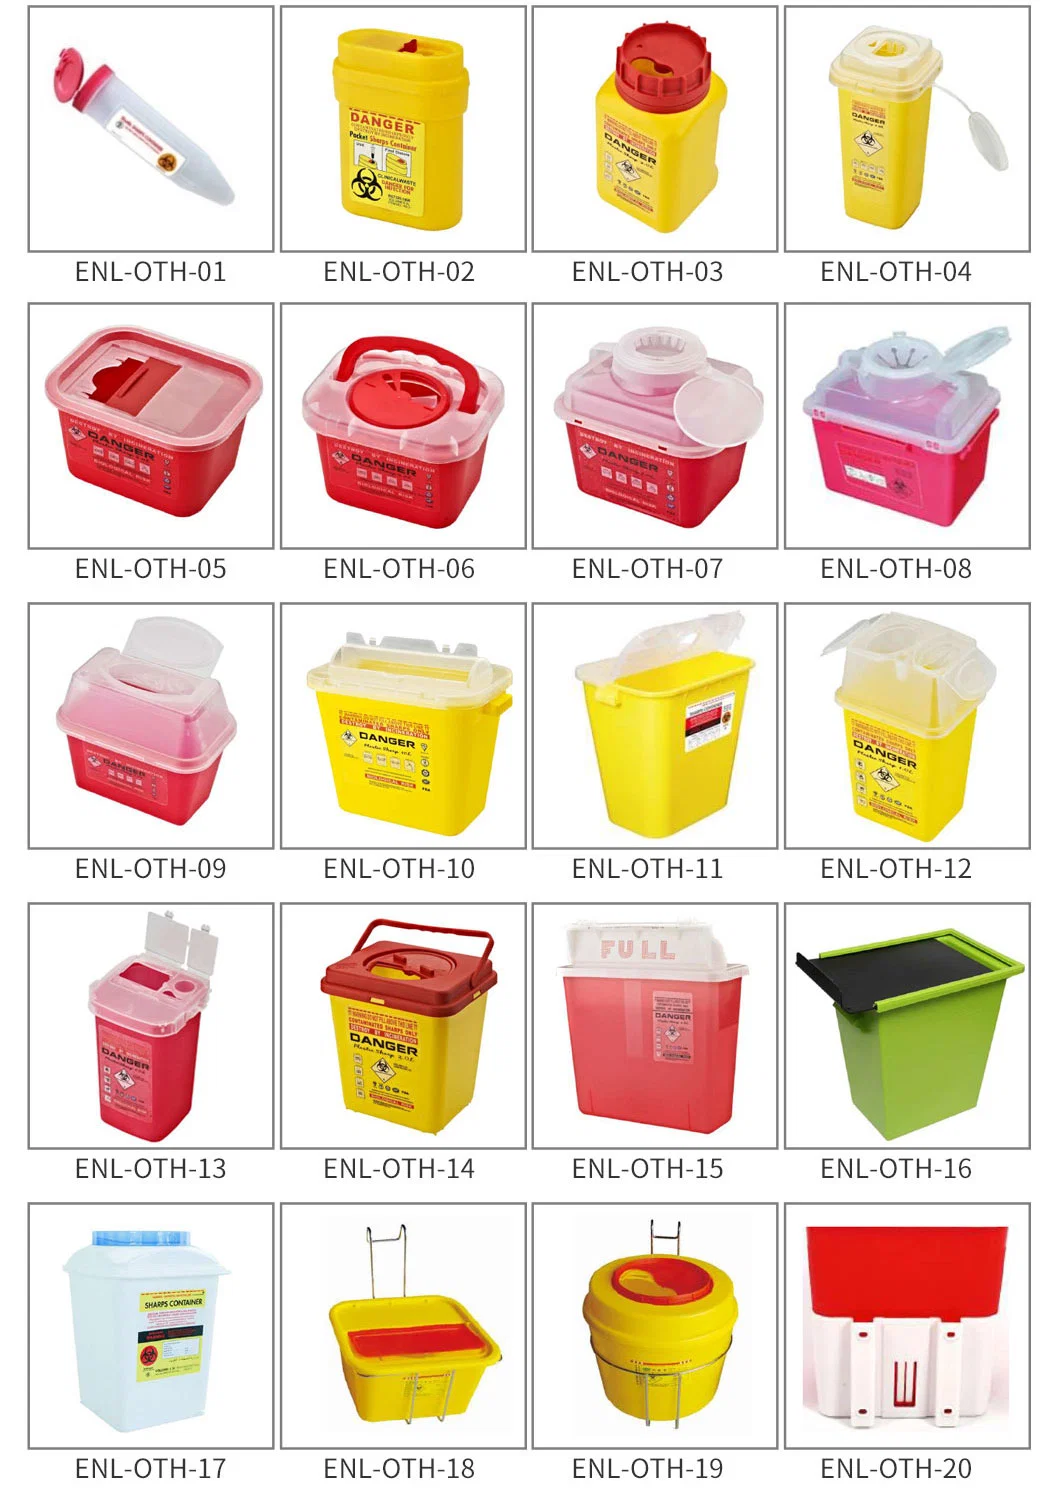 Medical Safety Disposable Plastic Sharp Container/Sharps Bins / Needle Container/PP Medical Sharp Box/ Safety Bin container for Chemo Waste